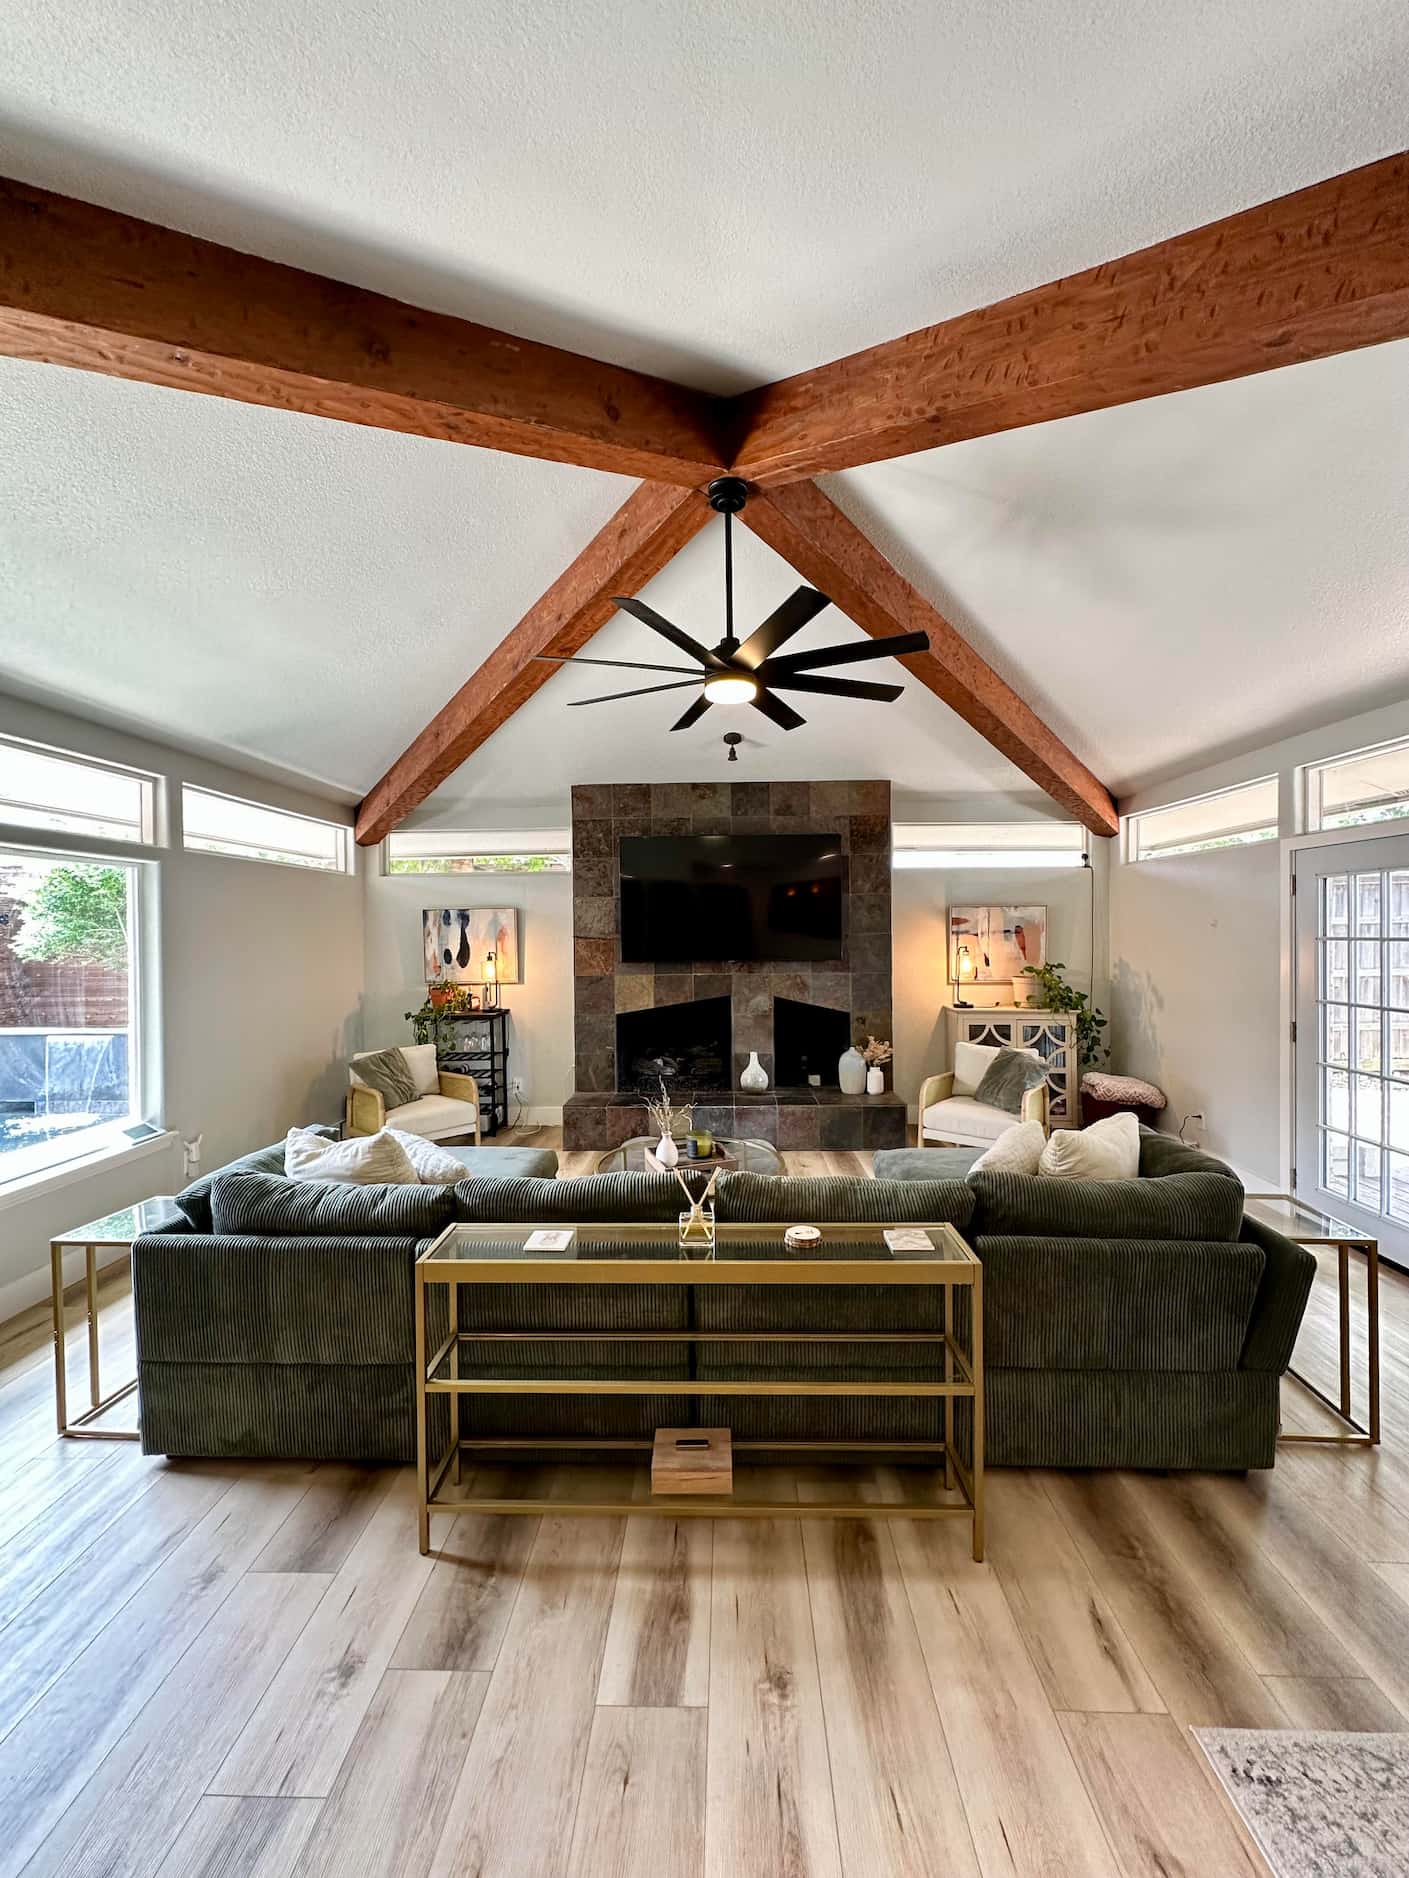 Living room with vaulted ceiling, beam accents on the ceiling and stone fireplace surround